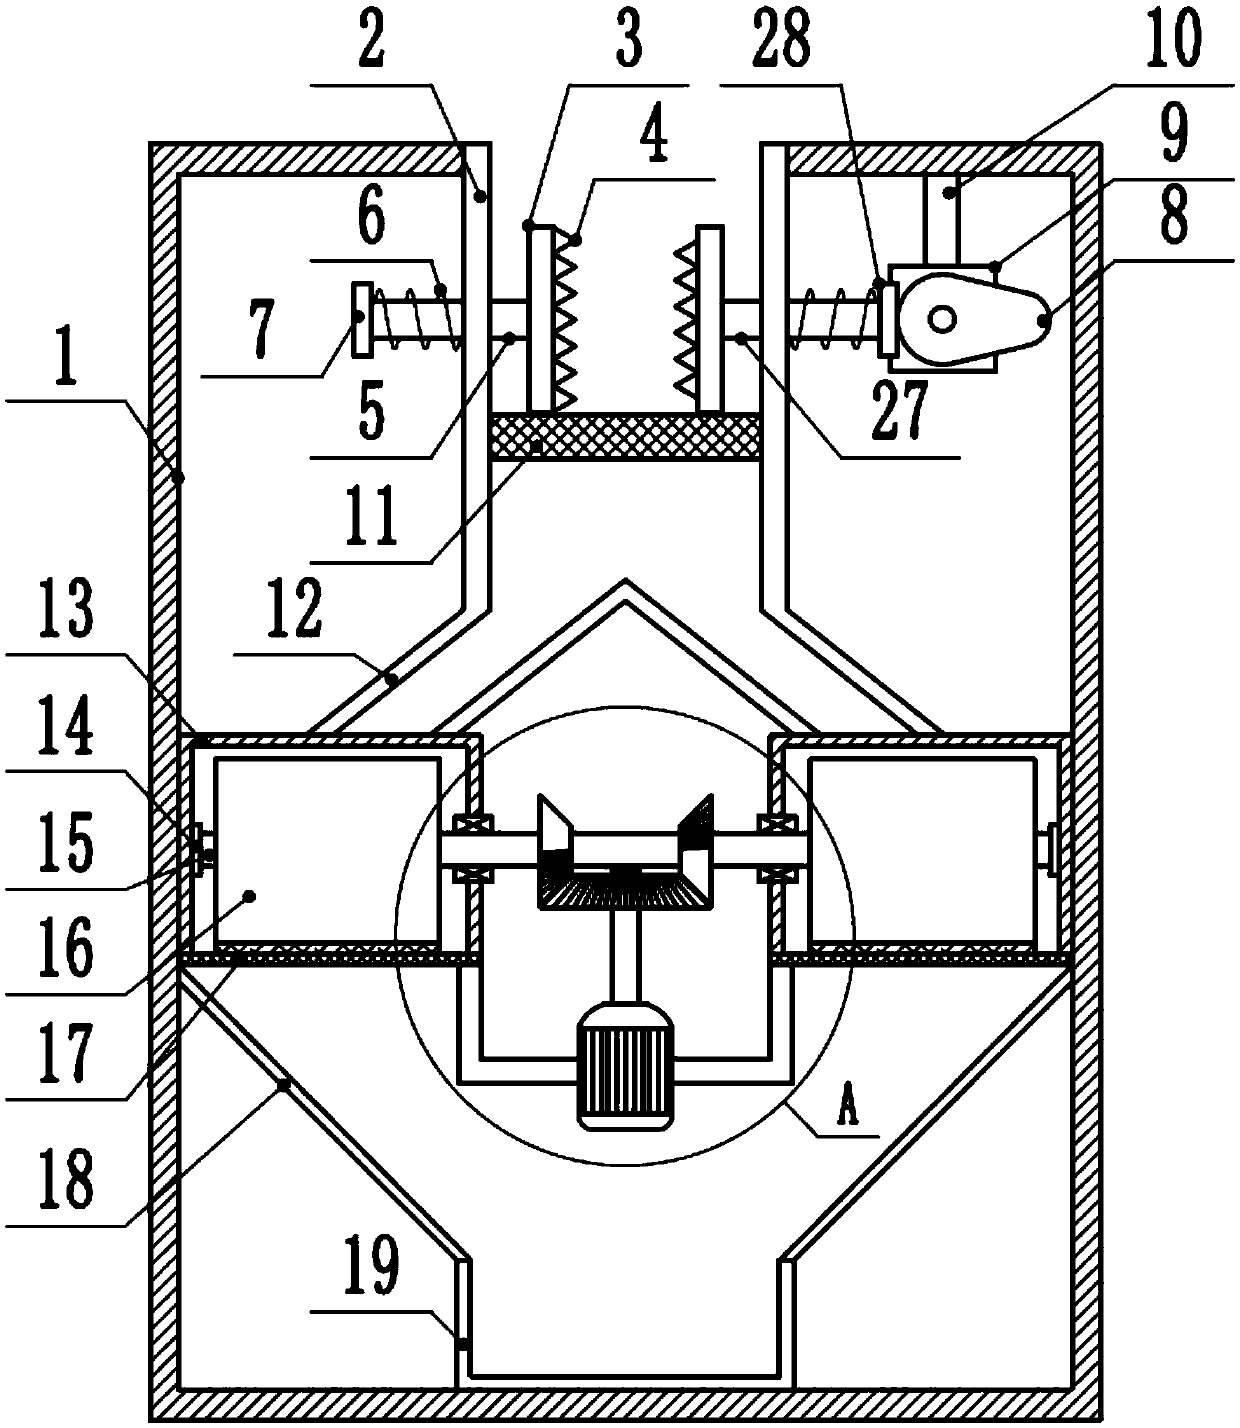 Fine grinding device for producing and processing powder cosmetics